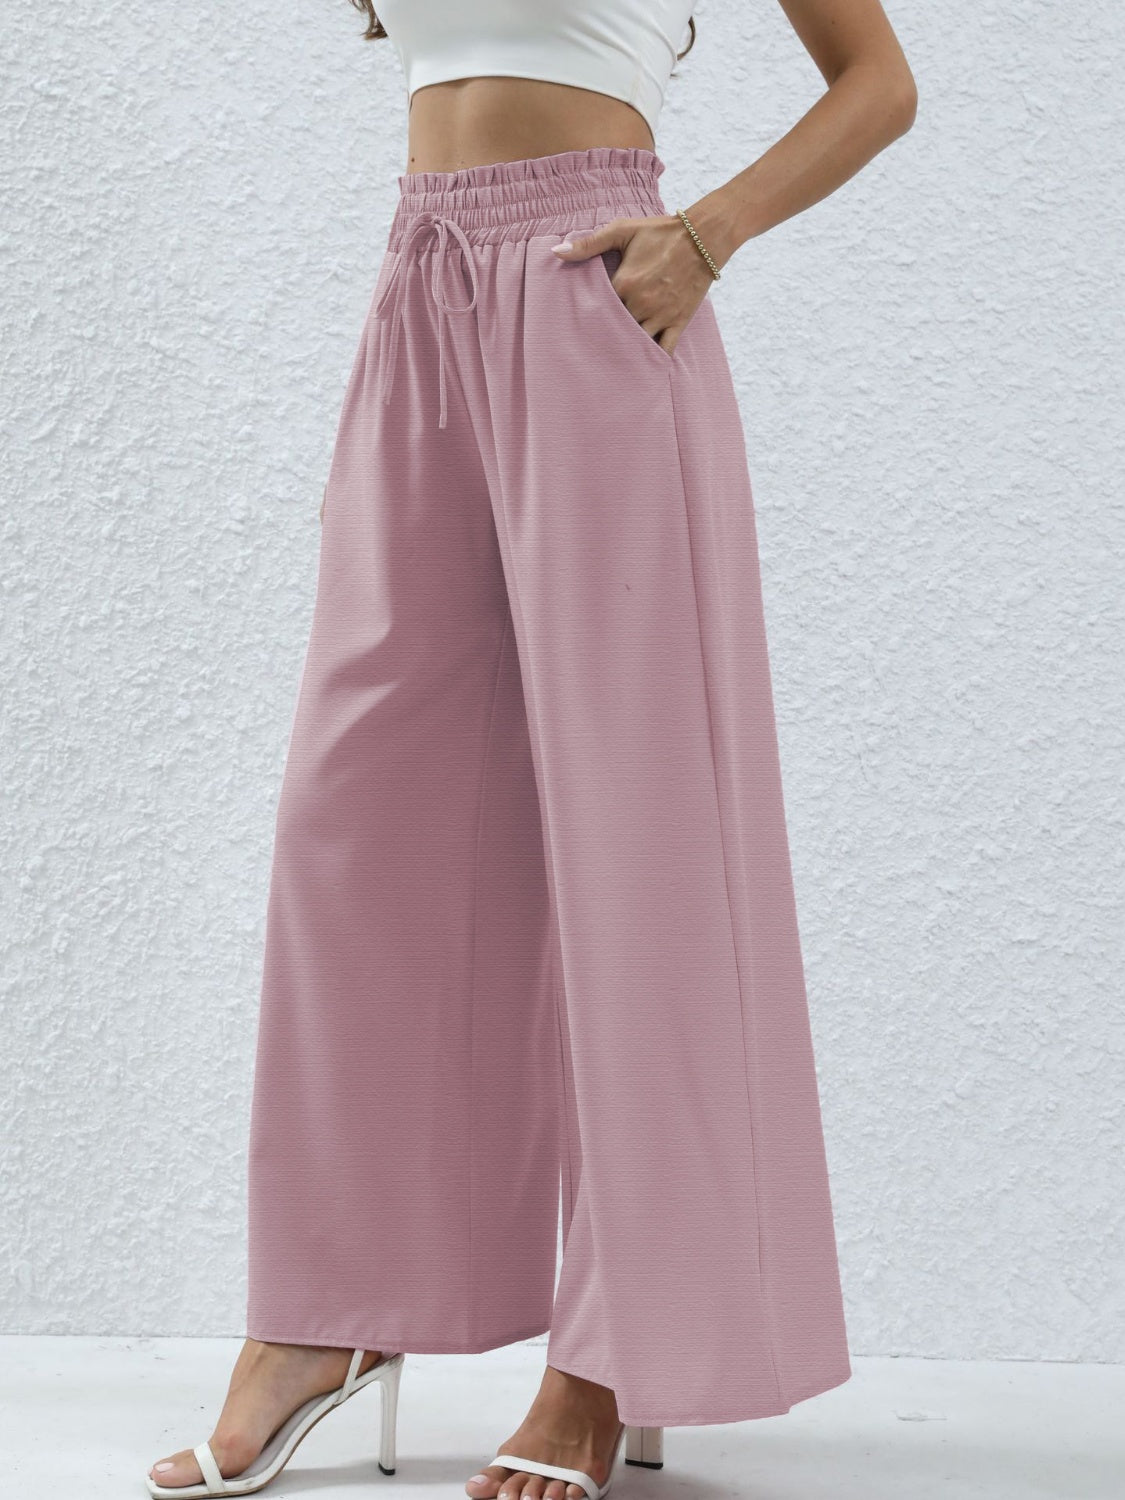 Dusty Pink High Waist Wide Leg Pants with Pockets